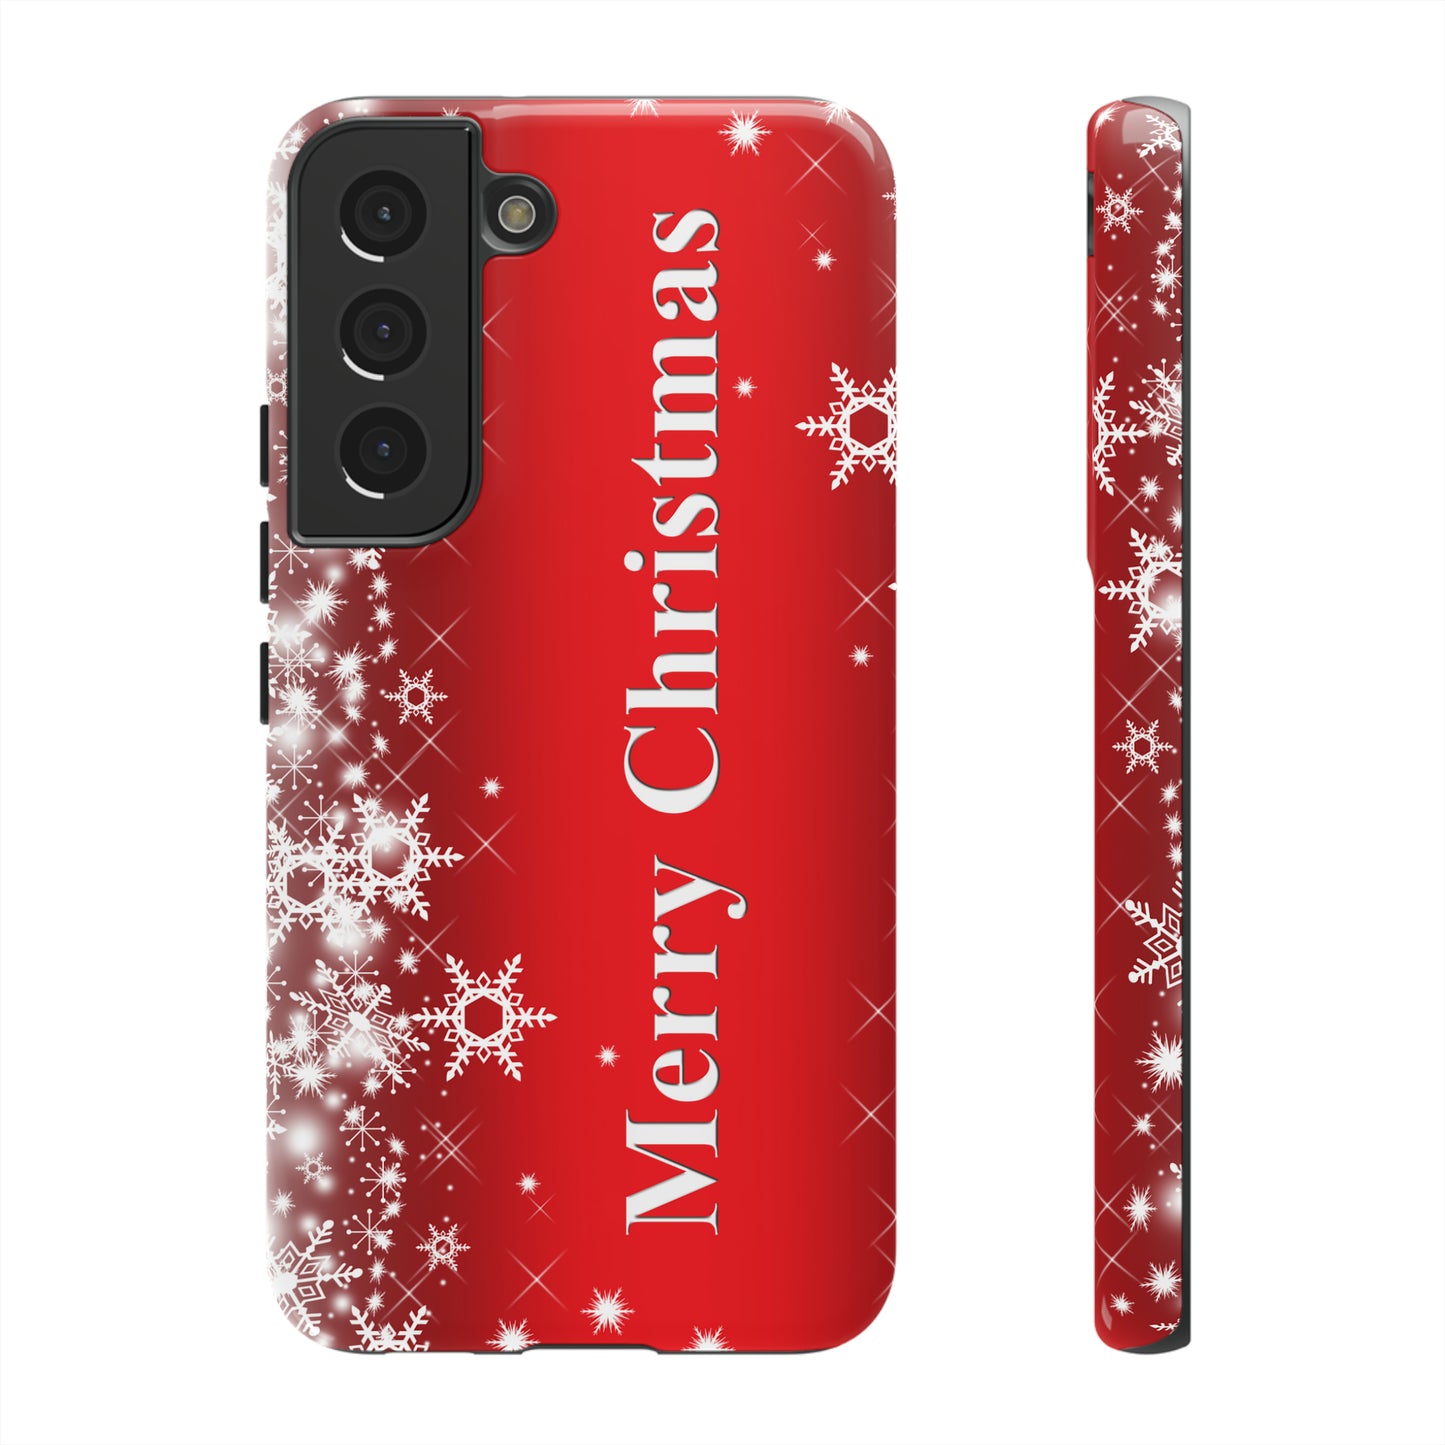 Merry Christmas - IPhone and Samsung Tough Cases